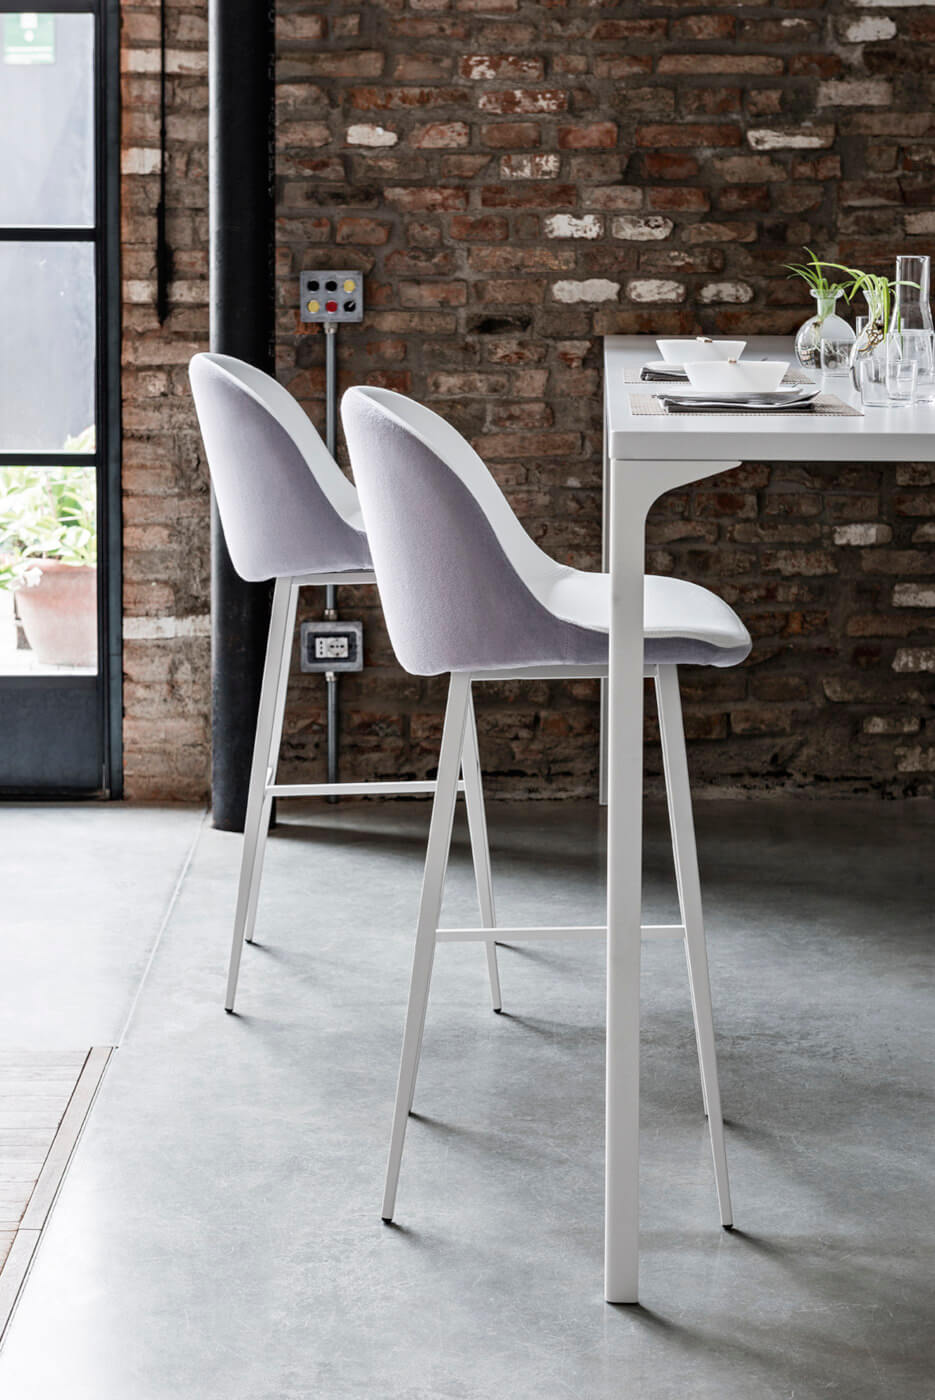 Sonny stool with back shell in gray fabric and seat in white leather